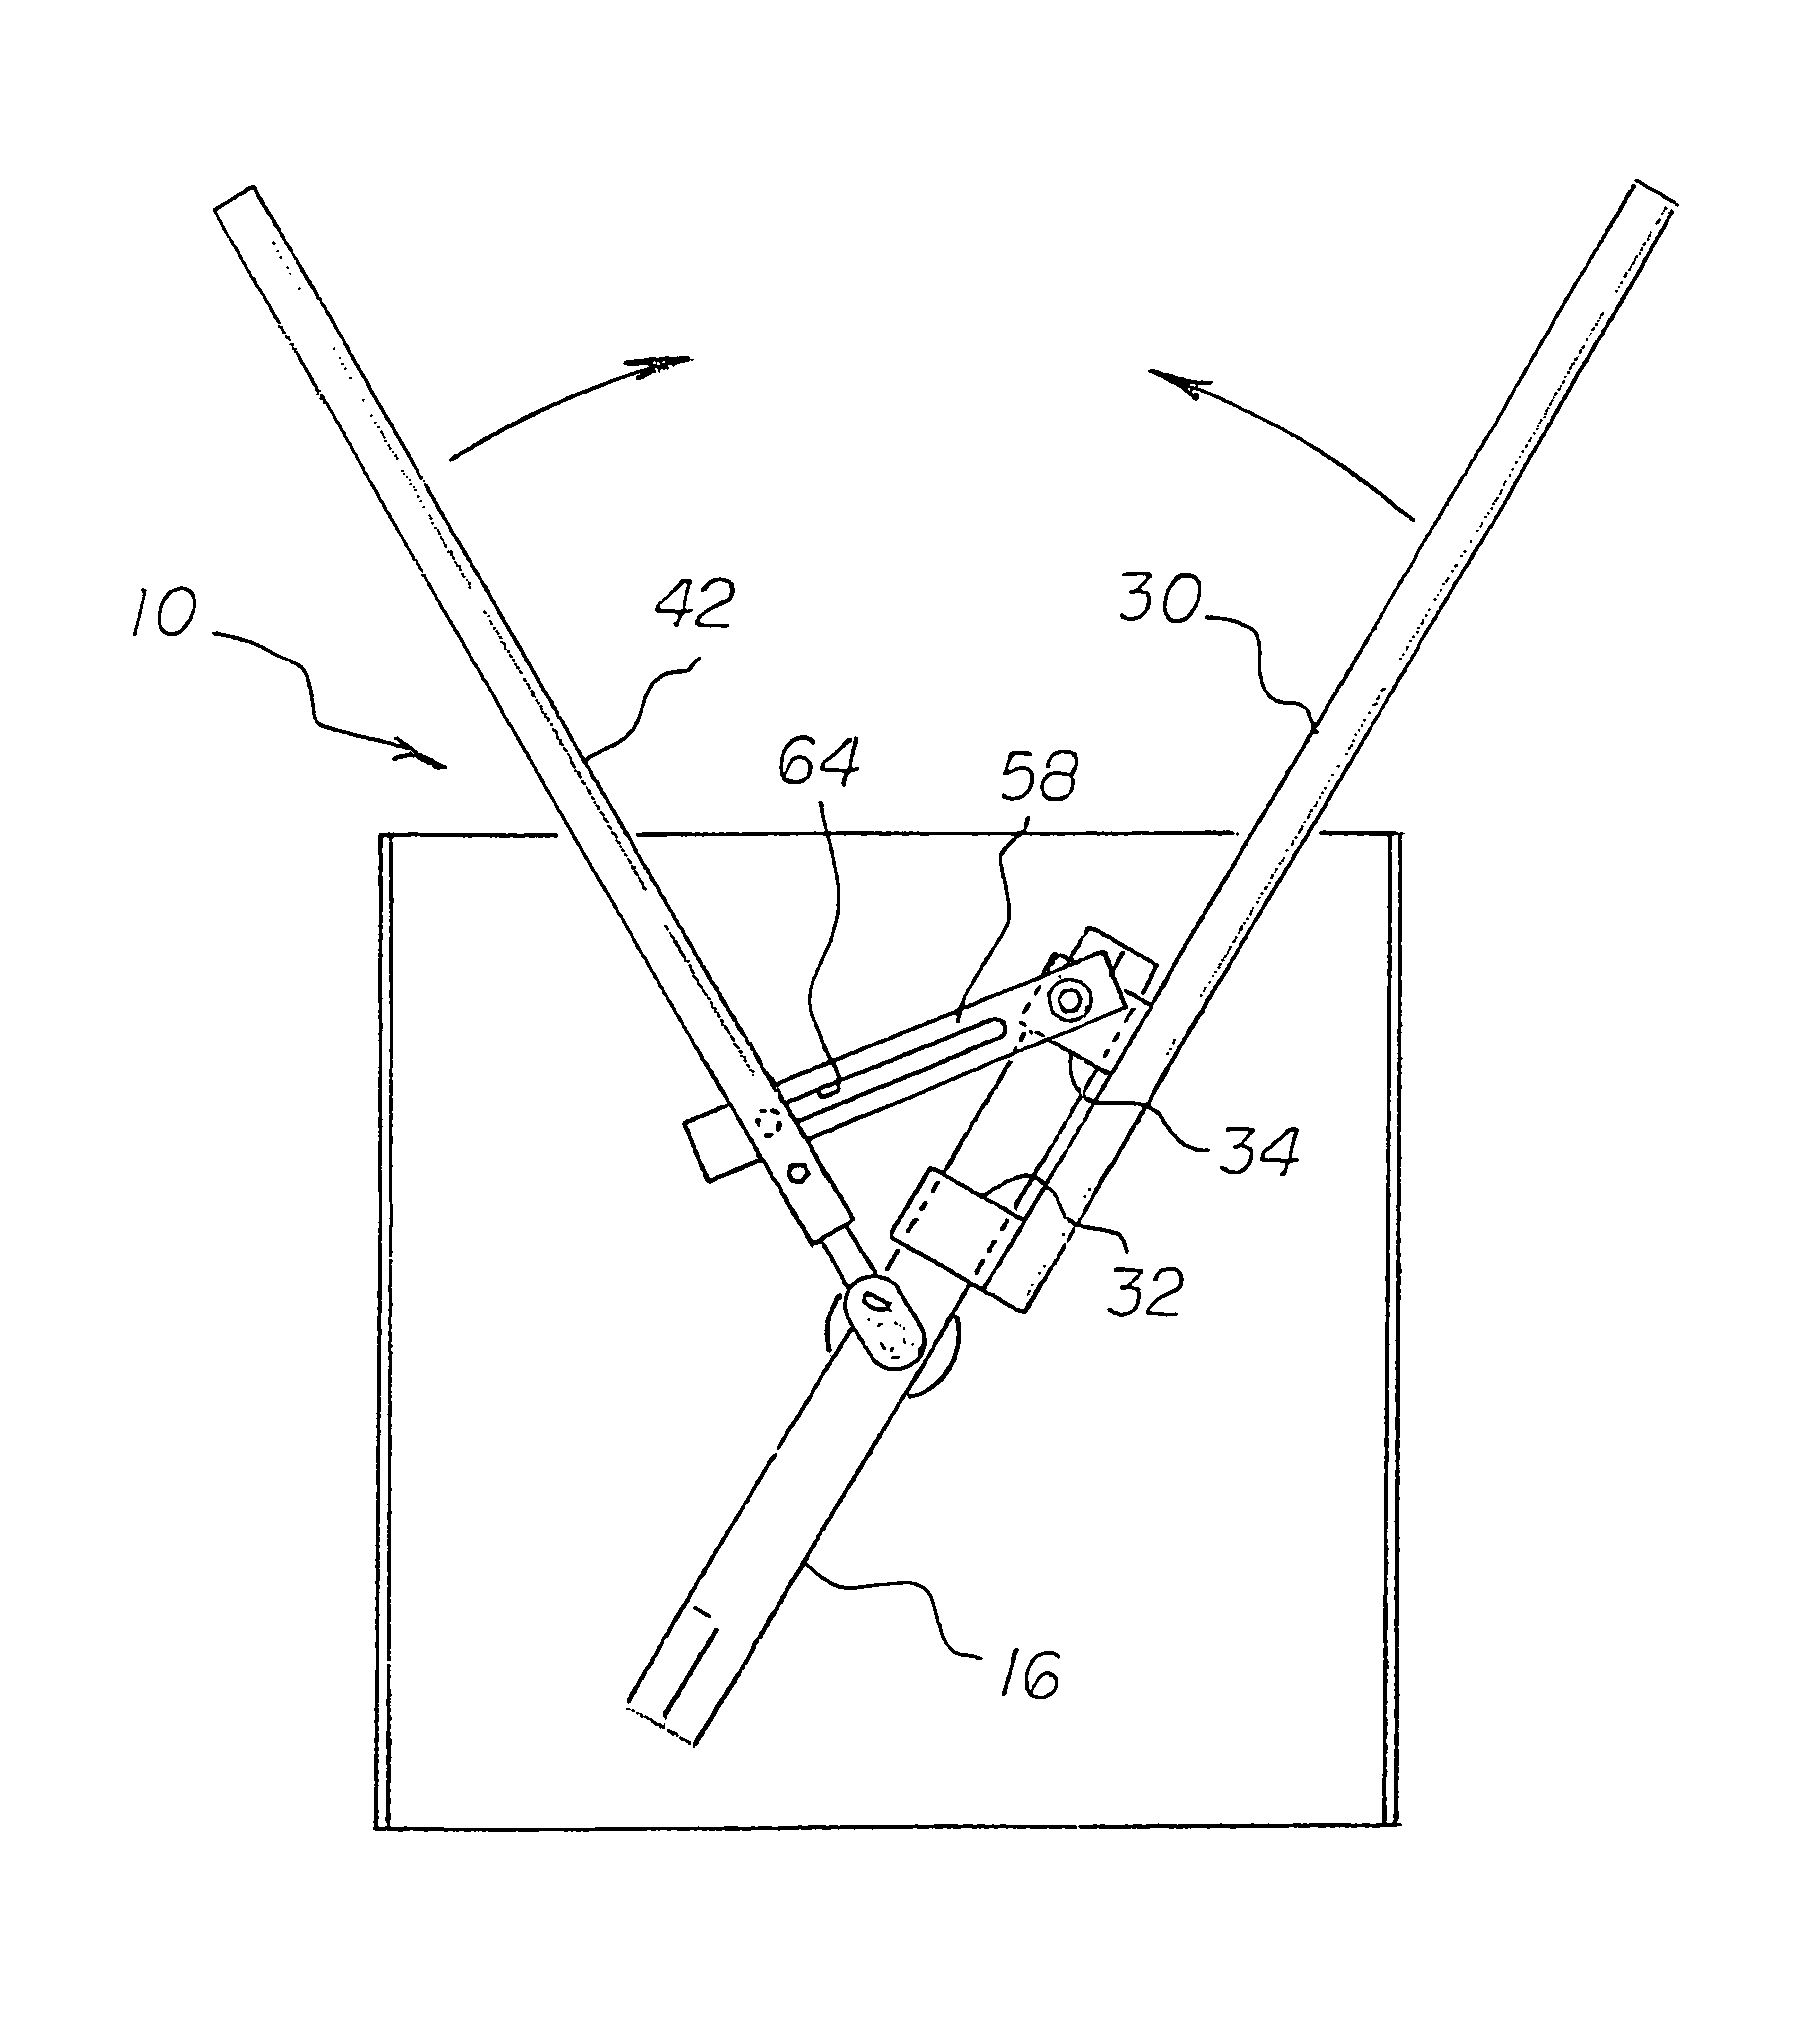 Blade removal assistance tool system